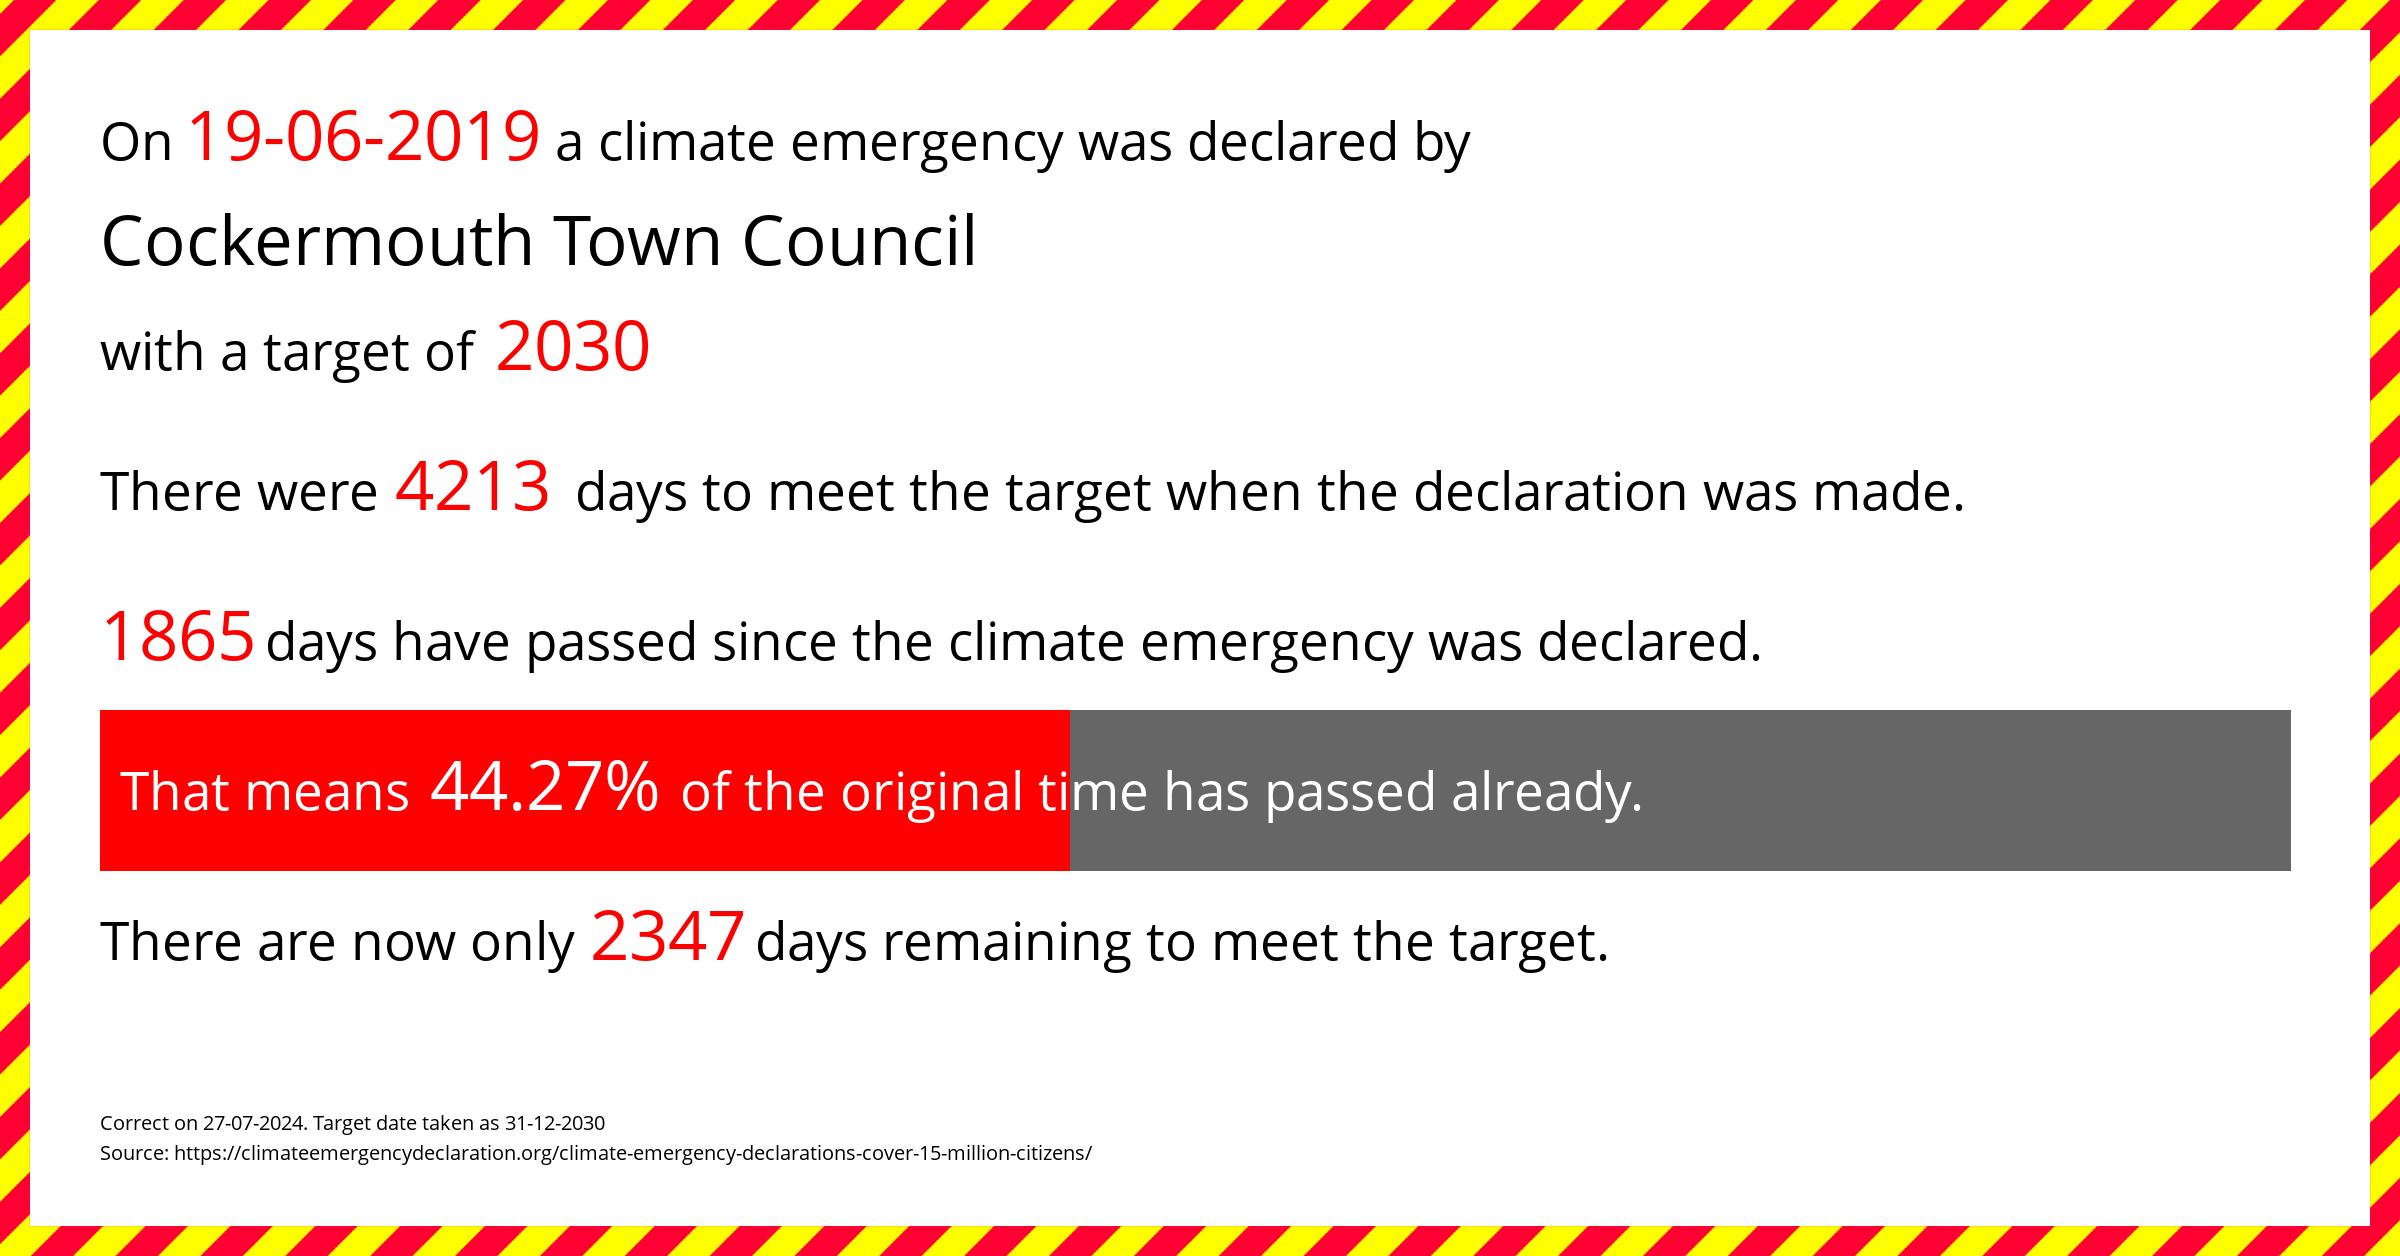 Cockermouth Town Council declared a Climate emergency on Wednesday 19th June 2019, with a target of 2030.